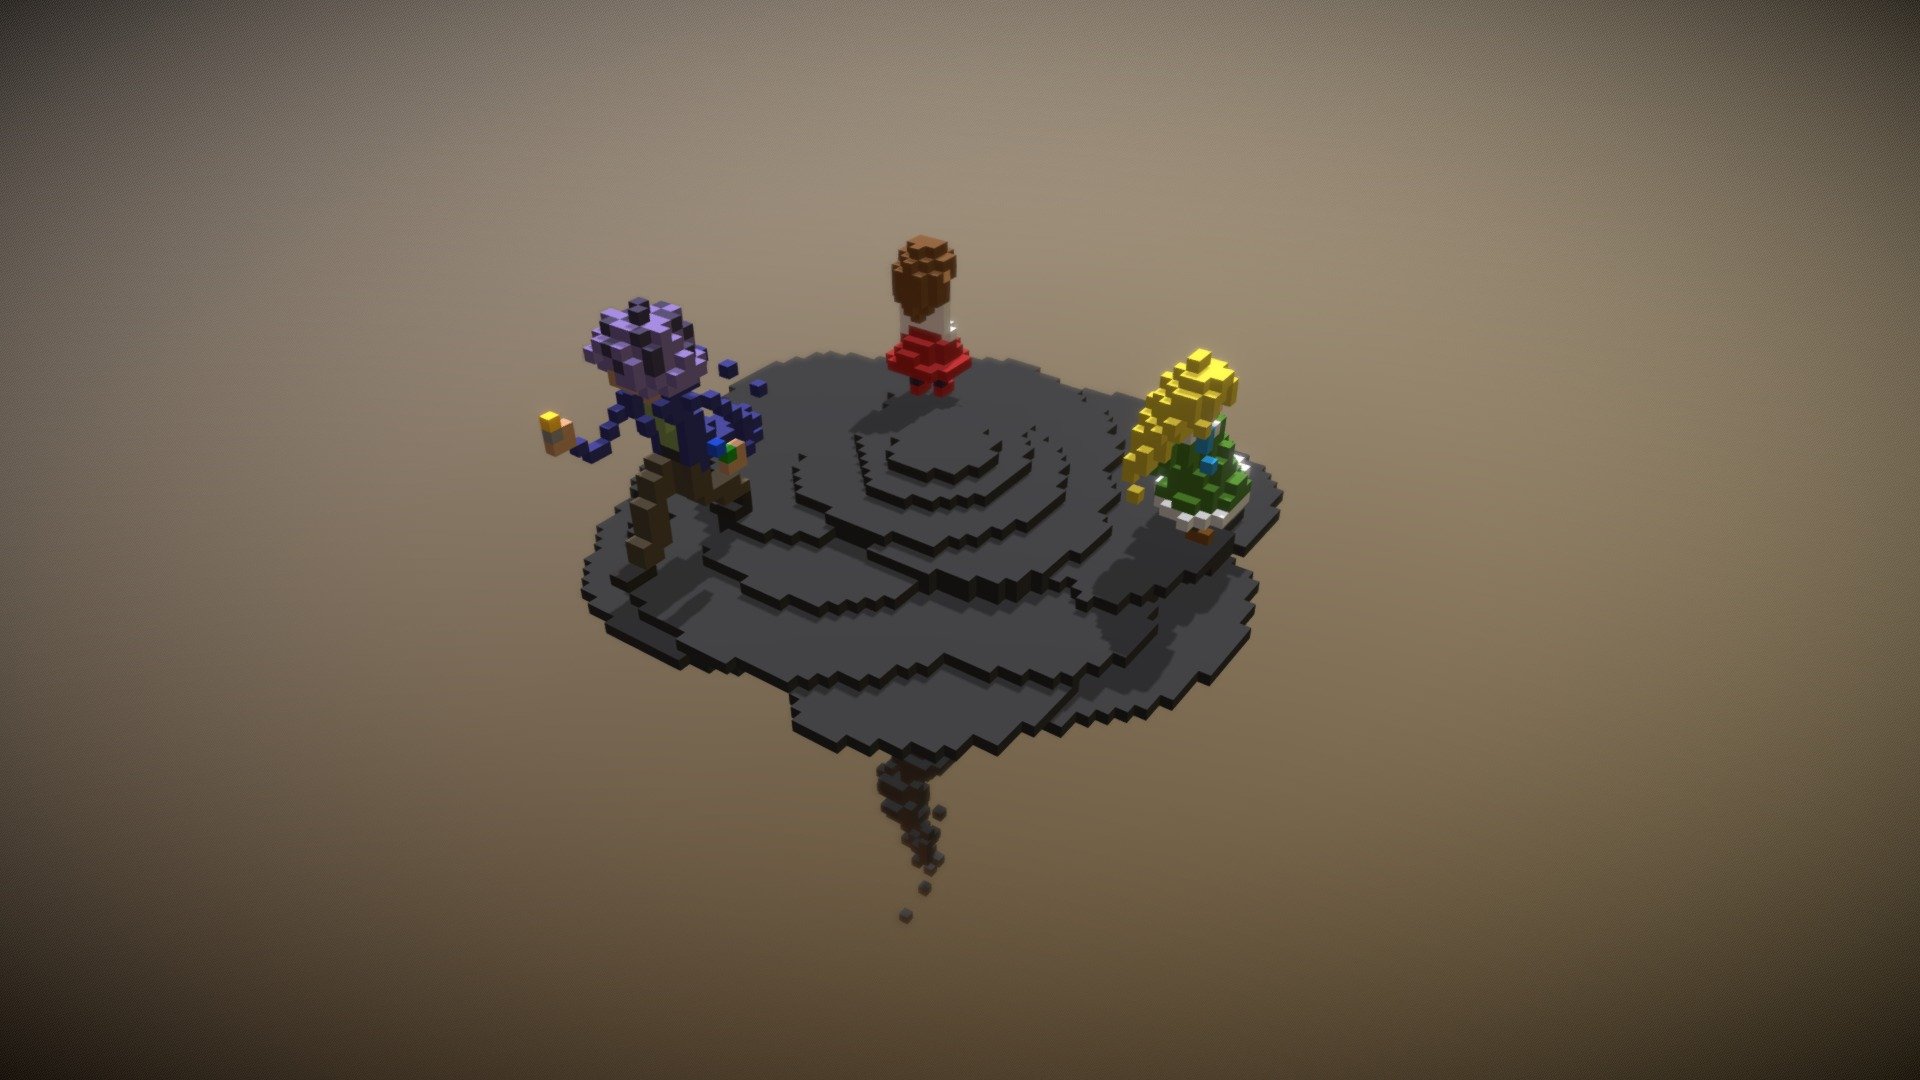 [Voxel_Ib Project] Flowers of the Abyss - IGM